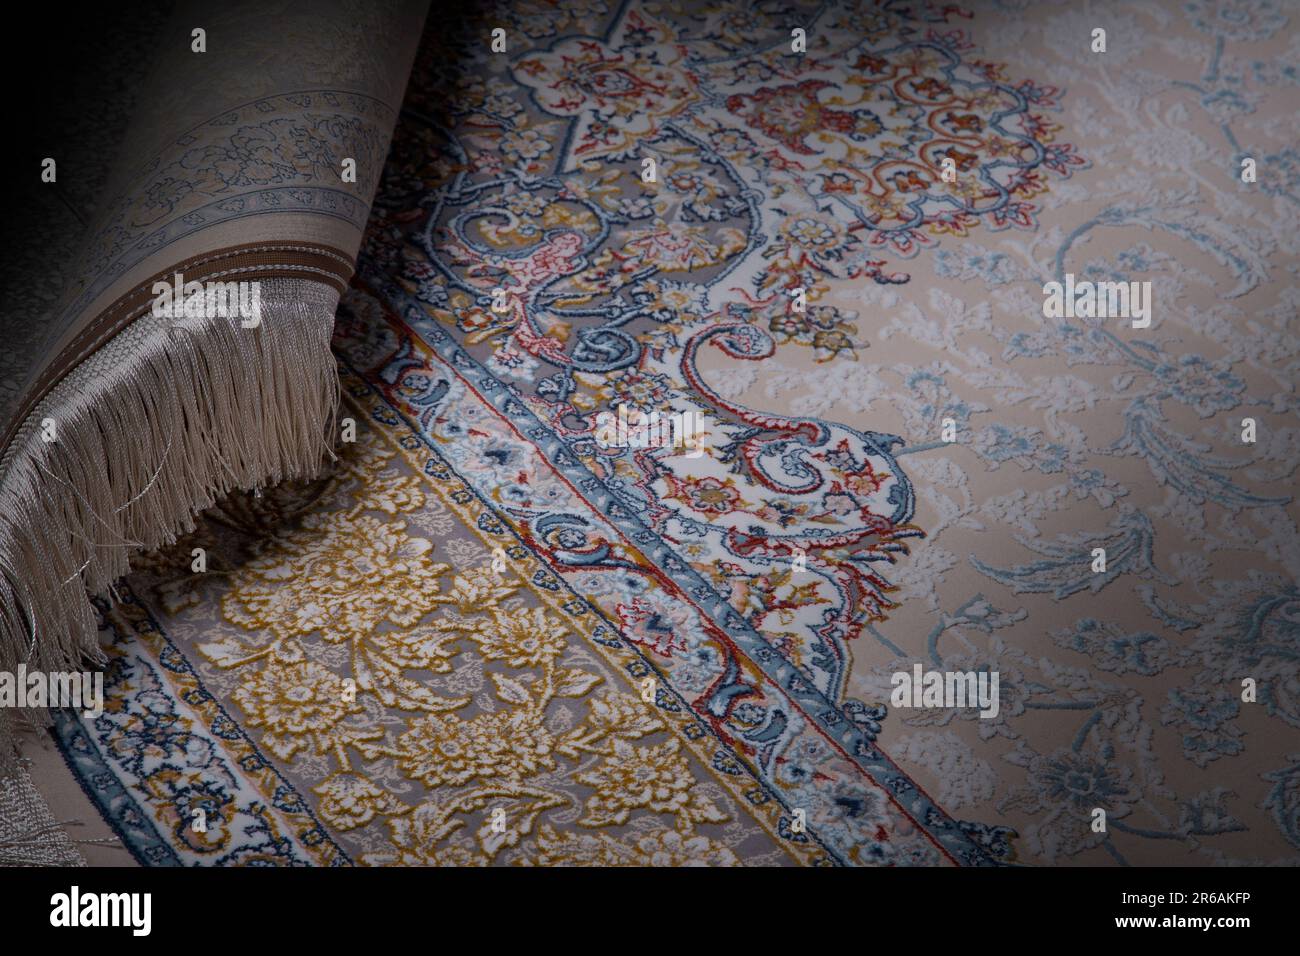 The texture of a solid patterned rug Stock Photo